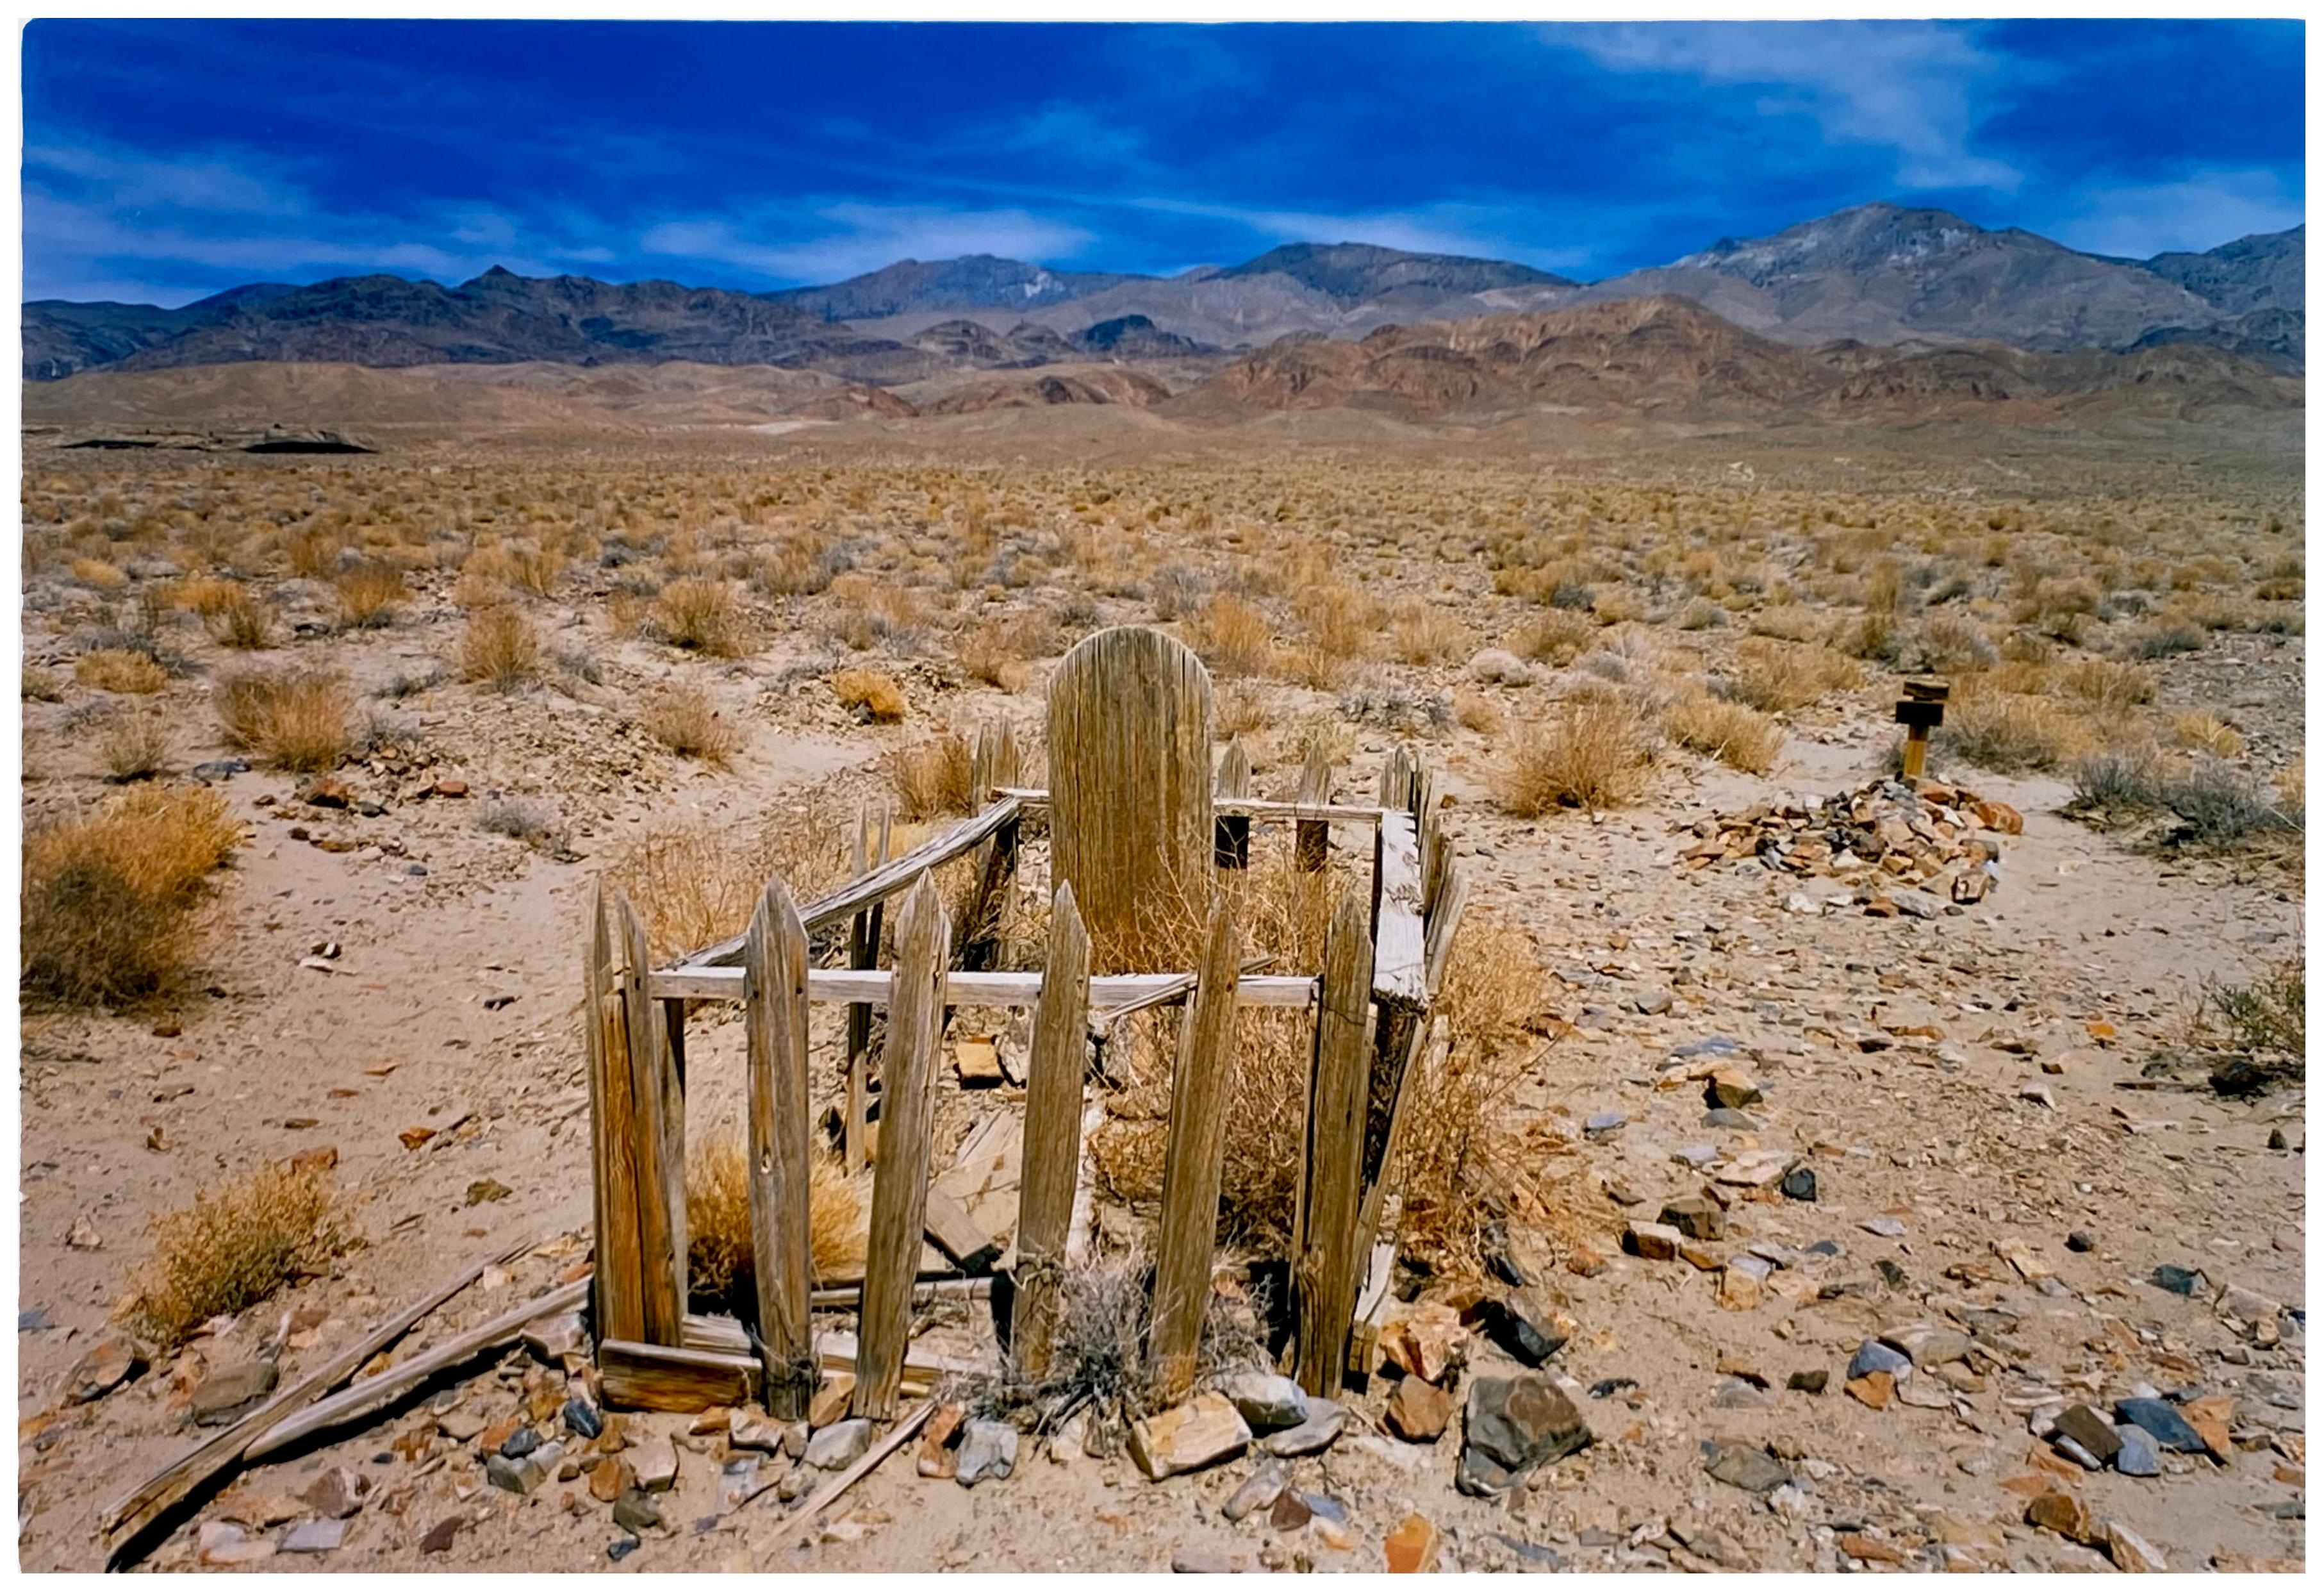 Pioneer's Grave I, Keeler, Inyo County, California - American Landscape Photo